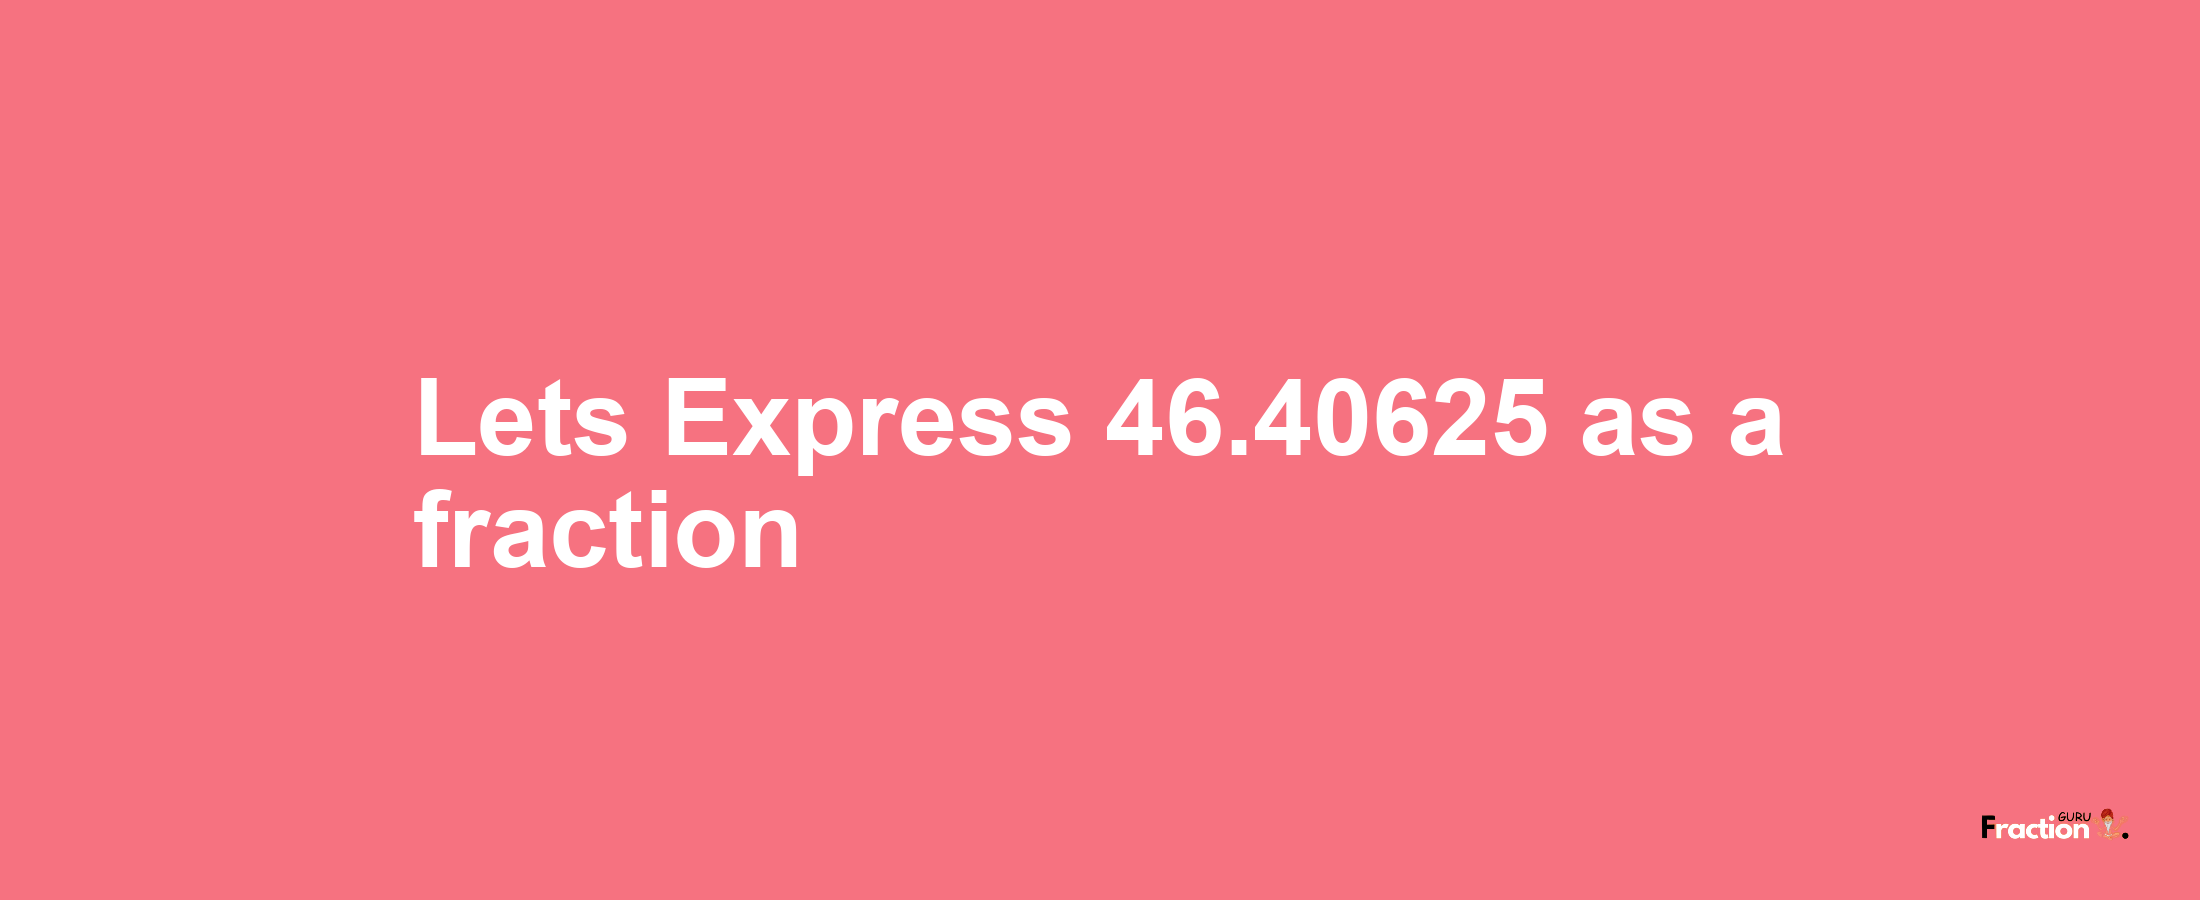 Lets Express 46.40625 as afraction